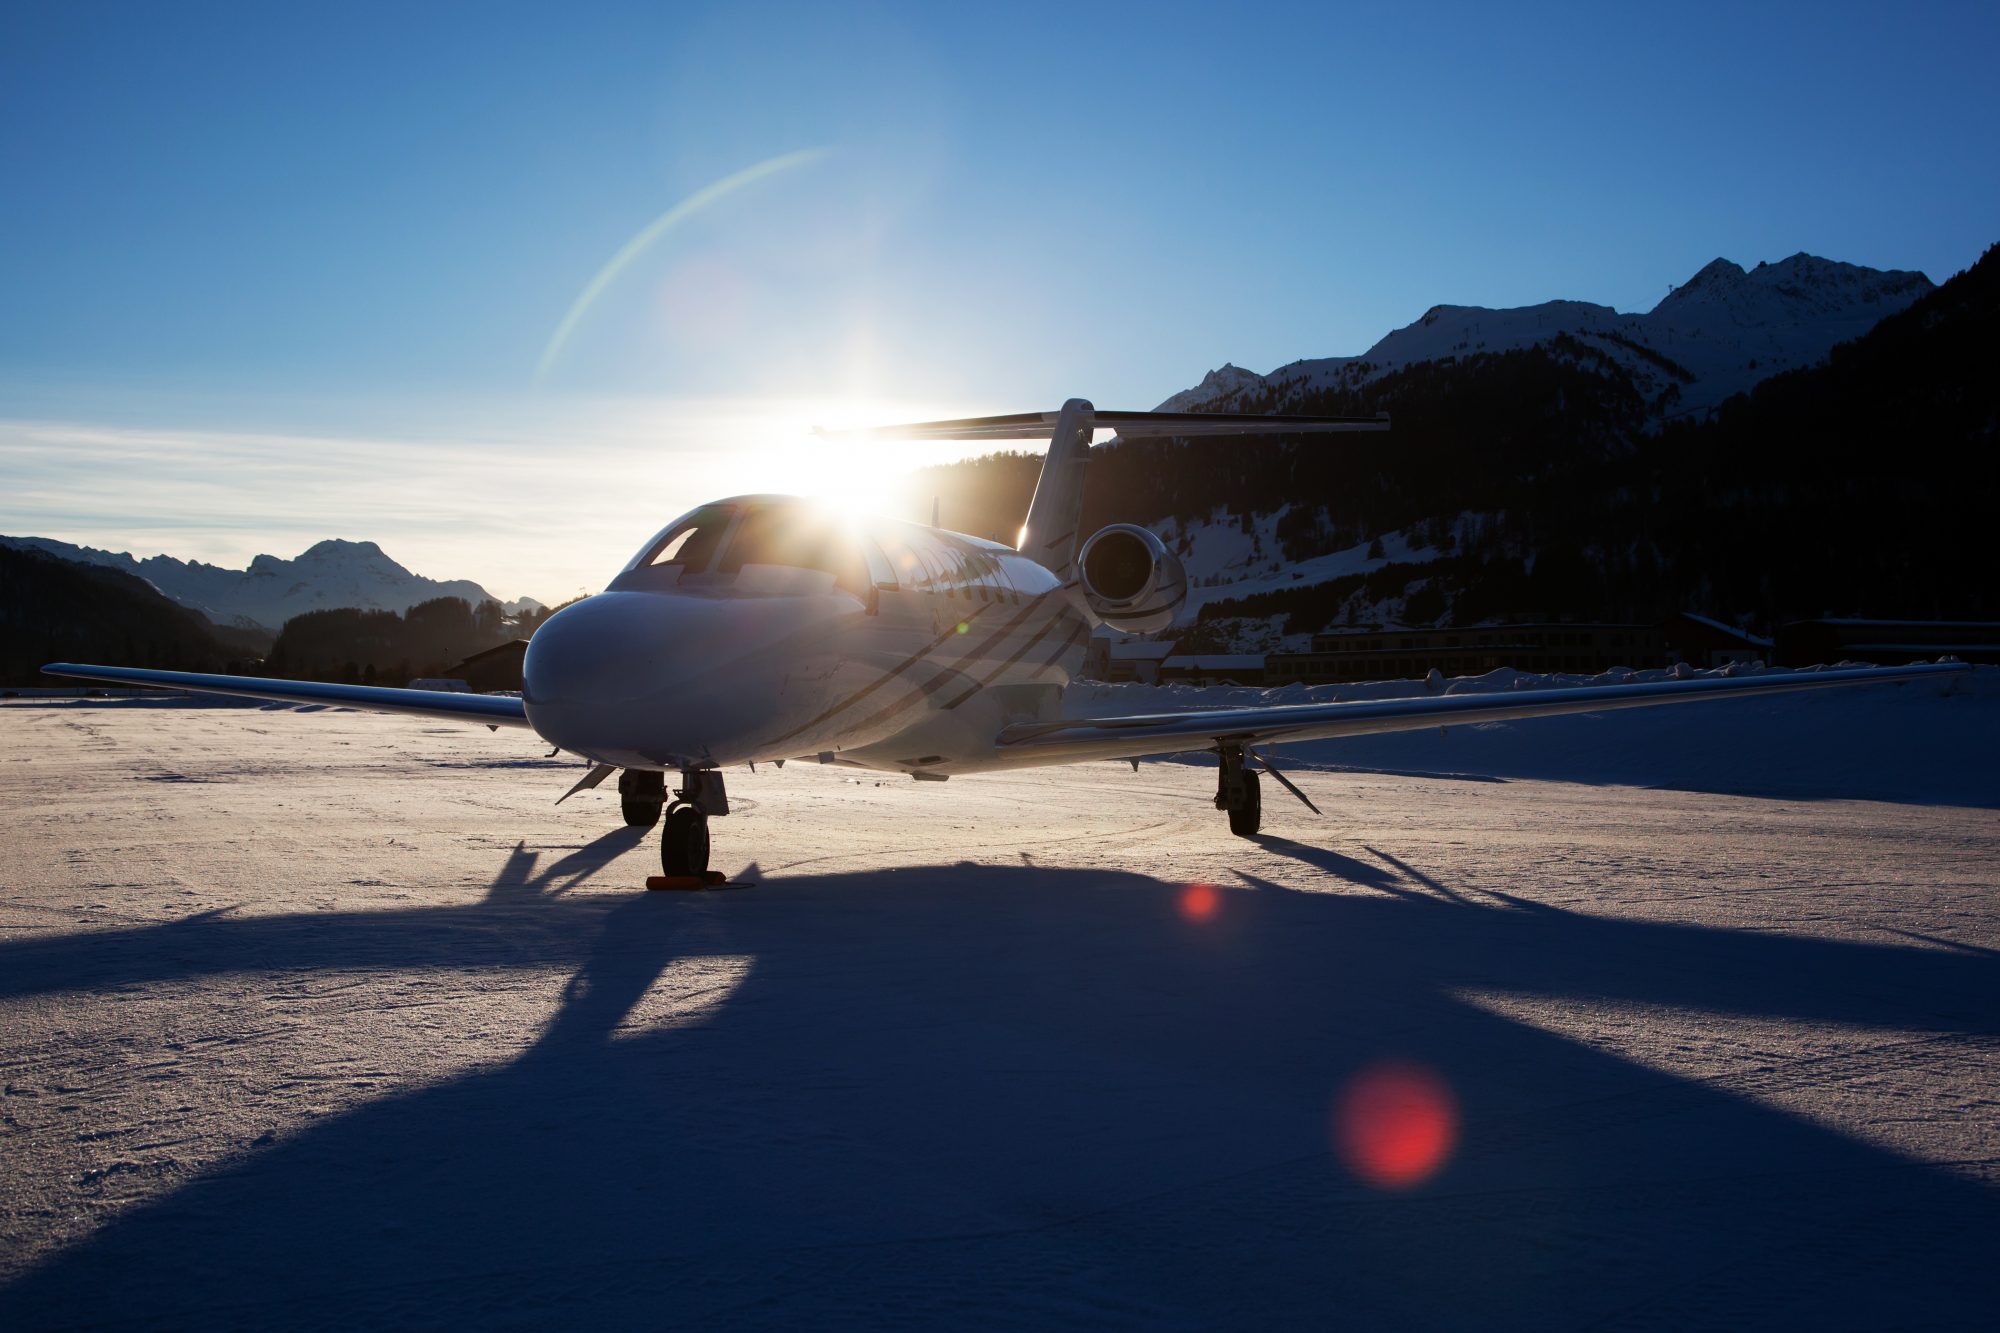 Reach the Slopes Faster By Private Jet